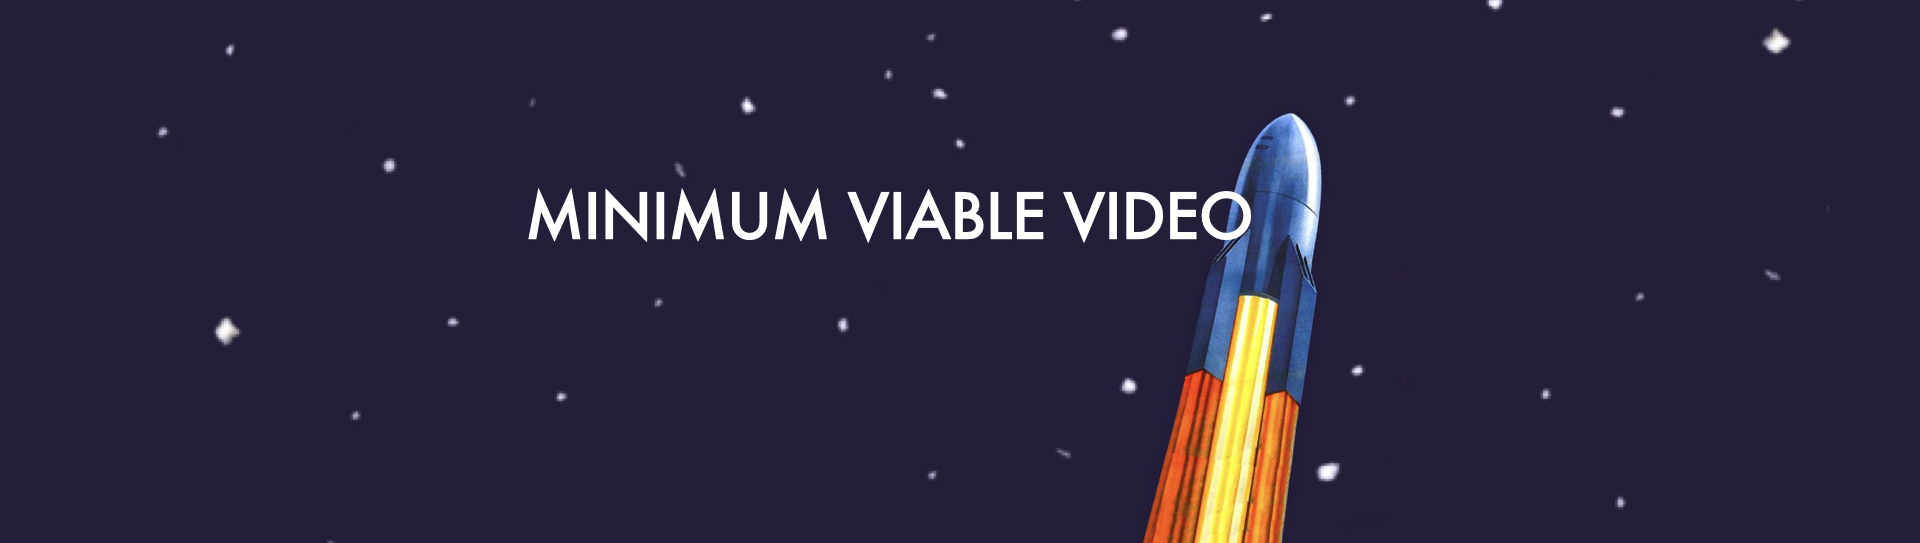 Reflecting on the first cohort of Minimum Viable Video: Results, Takeaways, and Plans for the Sequel